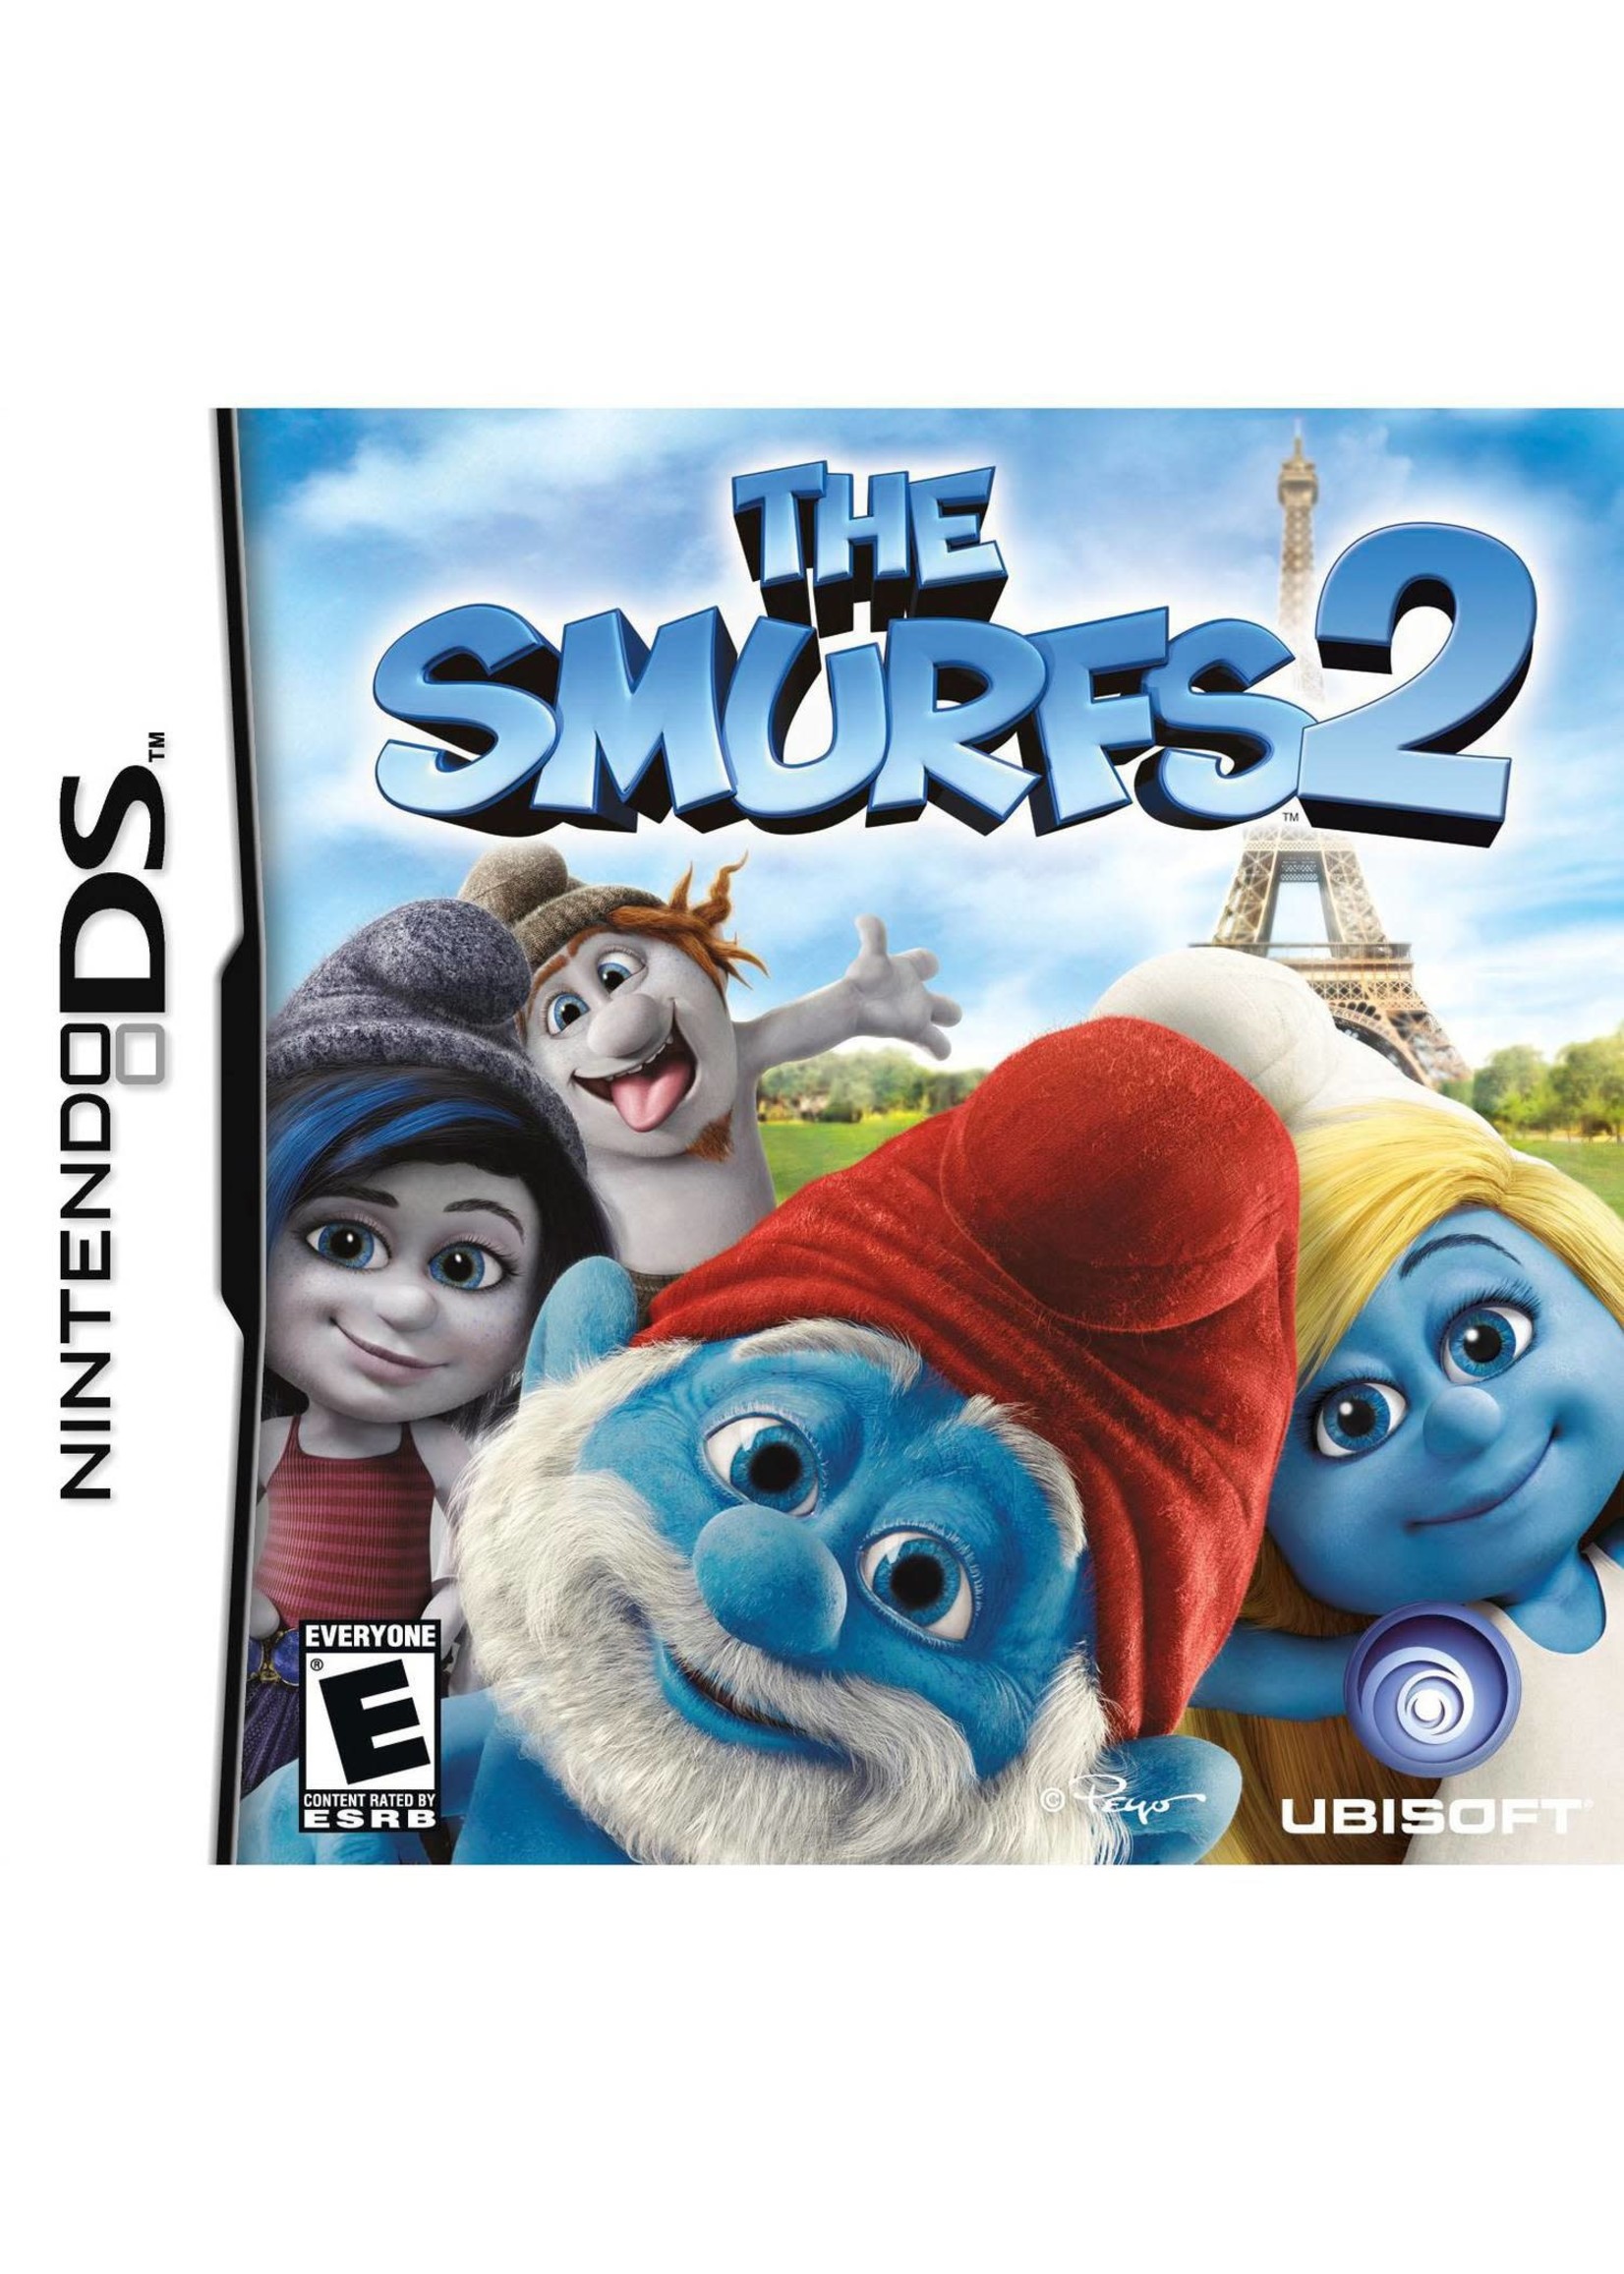 Nintendo DS Smurfs 2, The - Cart Only